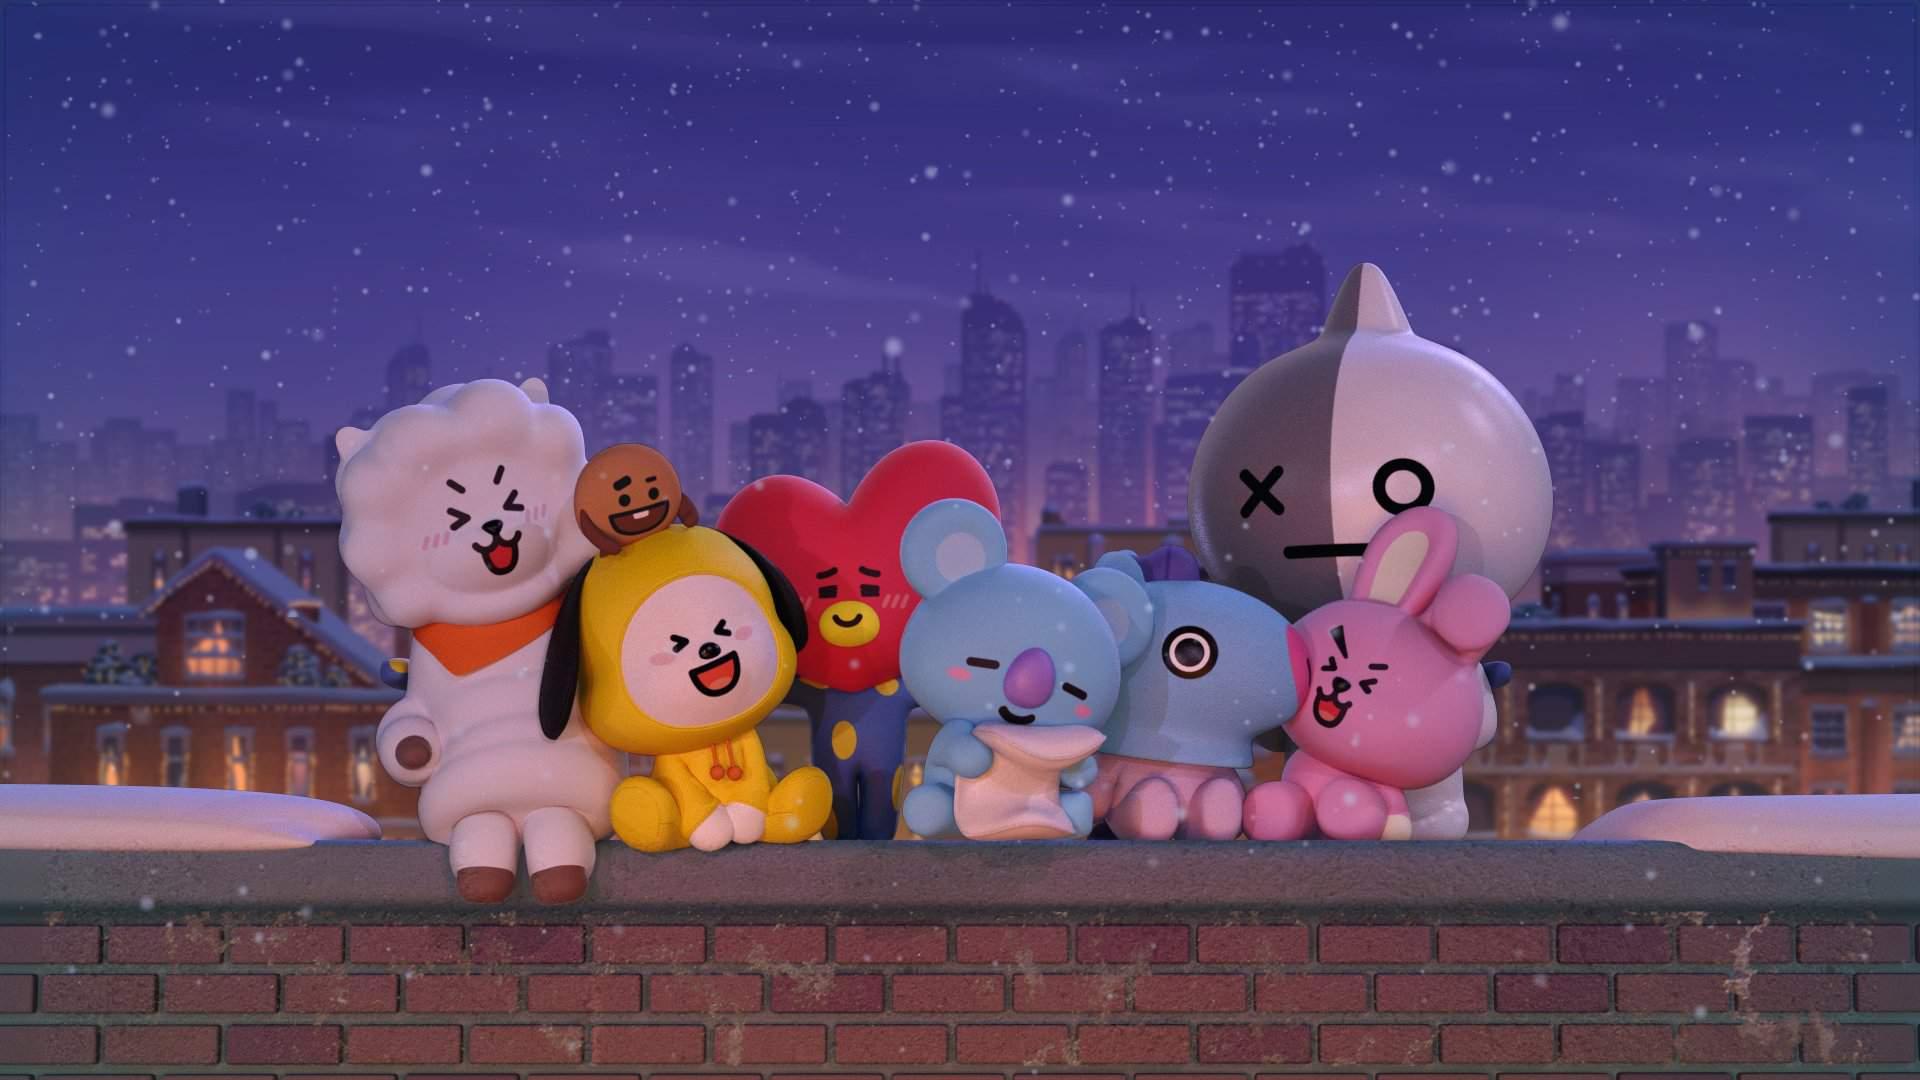 Bt21 Bts Landscape Wallpapers - Wallpaper - #1 Source for free Awesome ...